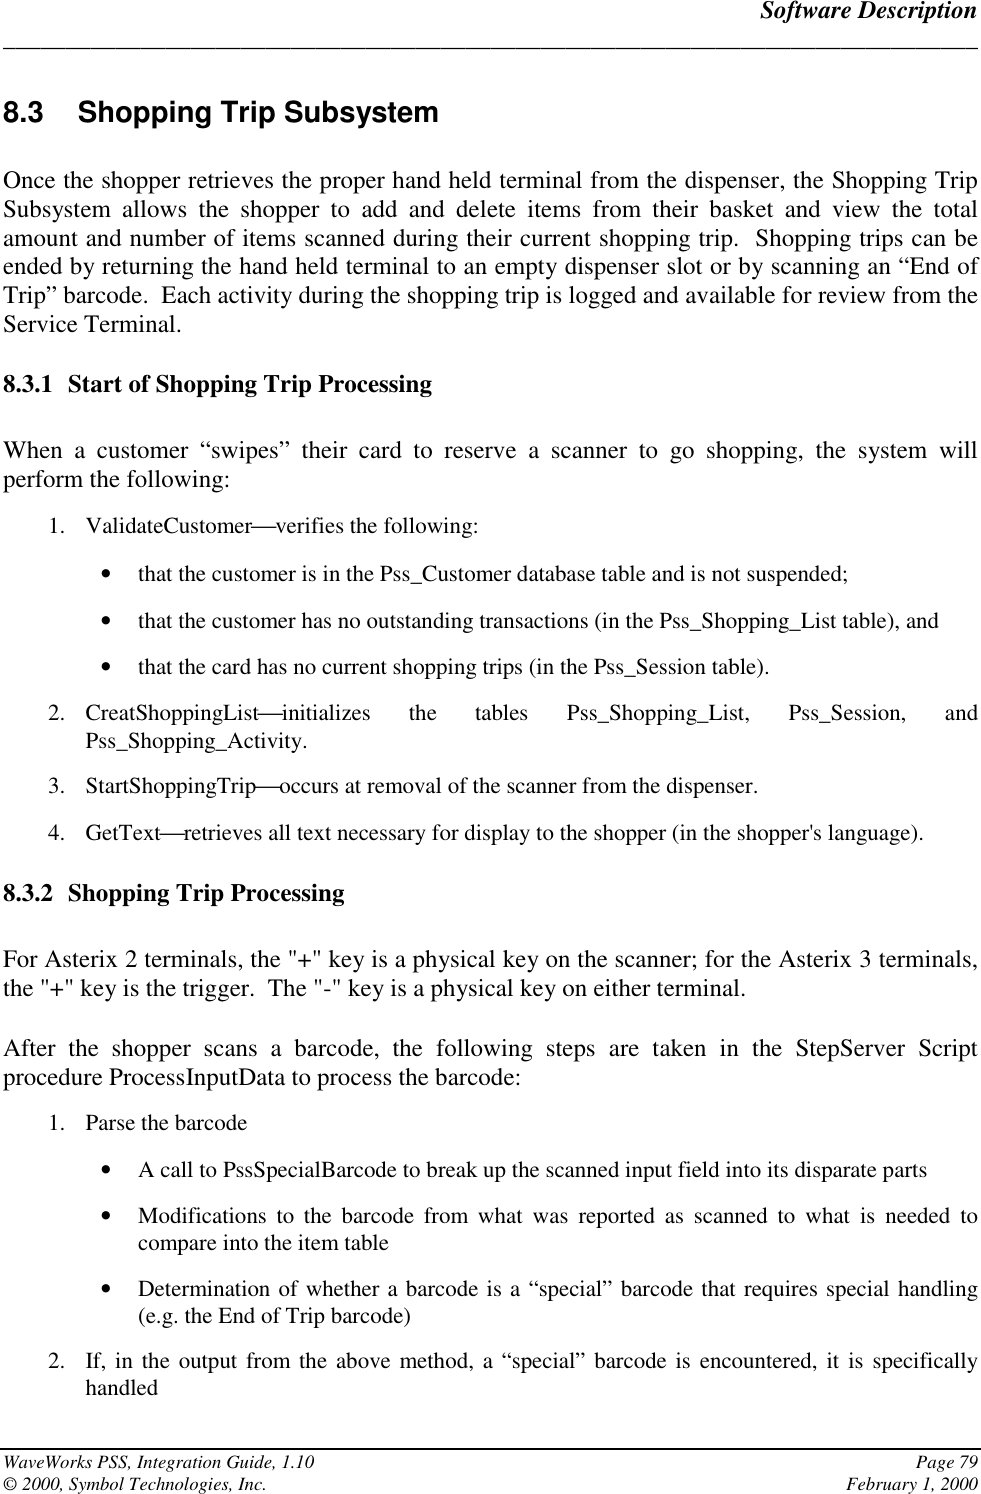 Software Description______________________________________________________________________________WaveWorks PSS, Integration Guide, 1.10 Page 79© 2000, Symbol Technologies, Inc. February 1, 20008.3  Shopping Trip SubsystemOnce the shopper retrieves the proper hand held terminal from the dispenser, the Shopping TripSubsystem allows the shopper to add and delete items from their basket and view the totalamount and number of items scanned during their current shopping trip.  Shopping trips can beended by returning the hand held terminal to an empty dispenser slot or by scanning an “End ofTrip” barcode.  Each activity during the shopping trip is logged and available for review from theService Terminal.8.3.1 Start of Shopping Trip ProcessingWhen a customer “swipes” their card to reserve a scanner to go shopping, the system willperform the following:1. ValidateCustomerverifies the following:• that the customer is in the Pss_Customer database table and is not suspended;• that the customer has no outstanding transactions (in the Pss_Shopping_List table), and• that the card has no current shopping trips (in the Pss_Session table).2. CreatShoppingListinitializes the tables Pss_Shopping_List, Pss_Session, andPss_Shopping_Activity.3. StartShoppingTripoccurs at removal of the scanner from the dispenser.4. GetTextretrieves all text necessary for display to the shopper (in the shopper&apos;s language).8.3.2 Shopping Trip ProcessingFor Asterix 2 terminals, the &quot;+&quot; key is a physical key on the scanner; for the Asterix 3 terminals,the &quot;+&quot; key is the trigger.  The &quot;-&quot; key is a physical key on either terminal.After the shopper scans a barcode, the following steps are taken in the StepServer Scriptprocedure ProcessInputData to process the barcode:1. Parse the barcode• A call to PssSpecialBarcode to break up the scanned input field into its disparate parts• Modifications to the barcode from what was reported as scanned to what is needed tocompare into the item table• Determination of whether a barcode is a “special” barcode that requires special handling(e.g. the End of Trip barcode)2. If, in the output from the above method, a “special” barcode is encountered, it is specificallyhandled